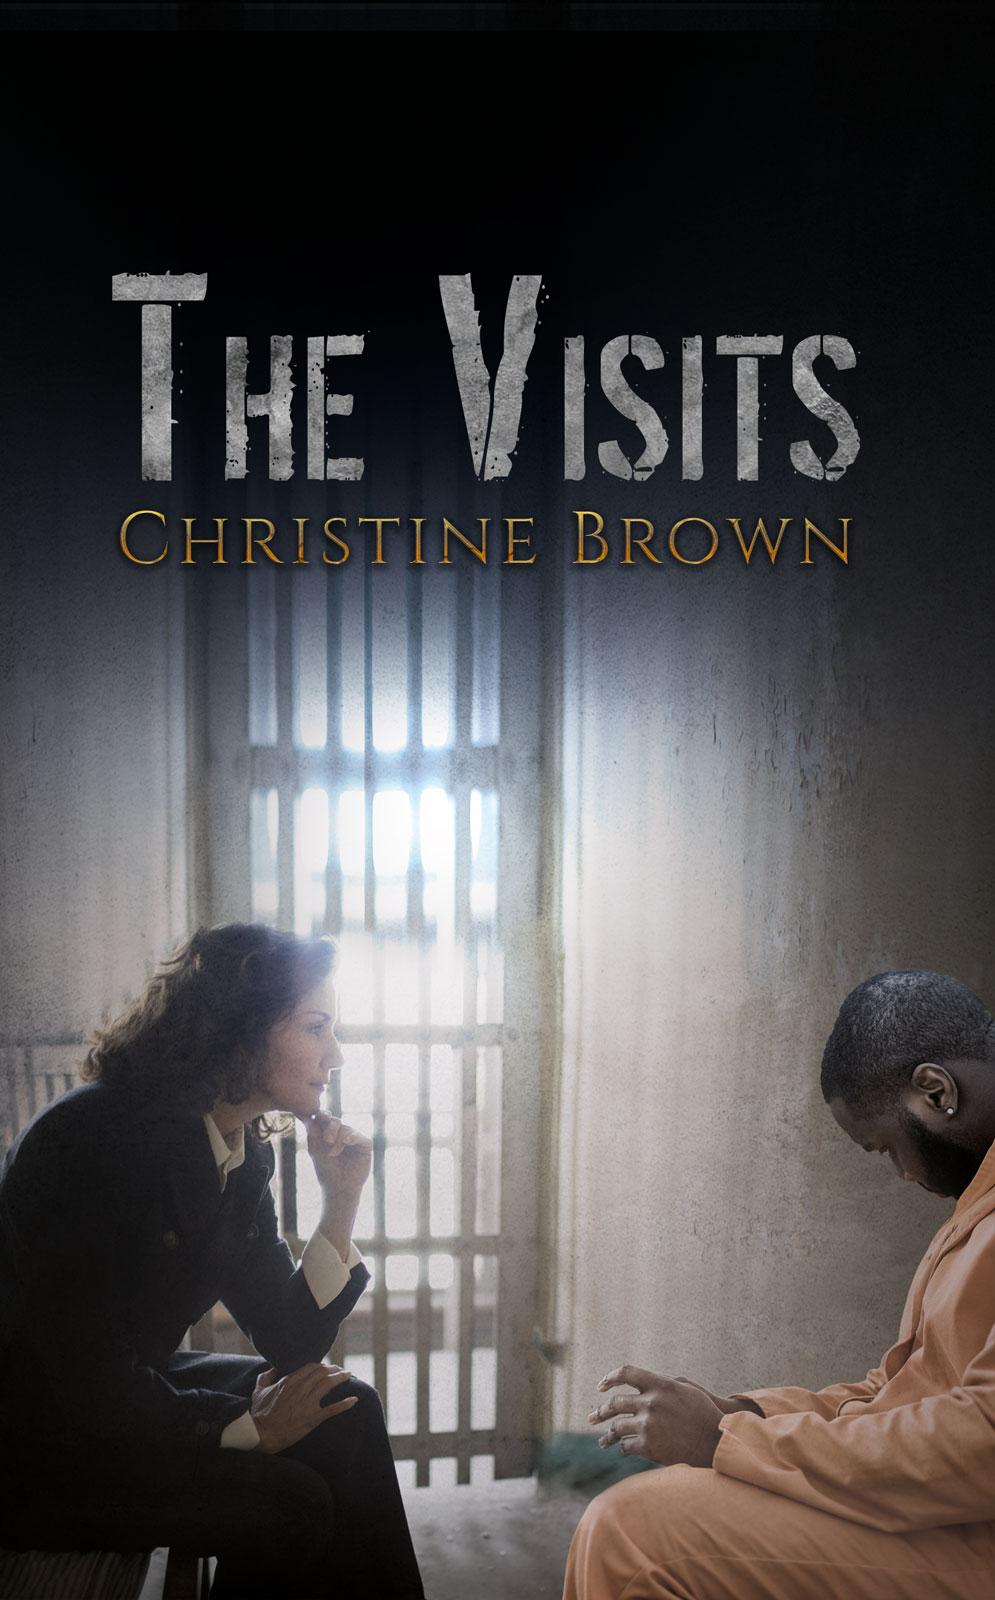 This image is the cover for the book The Visits